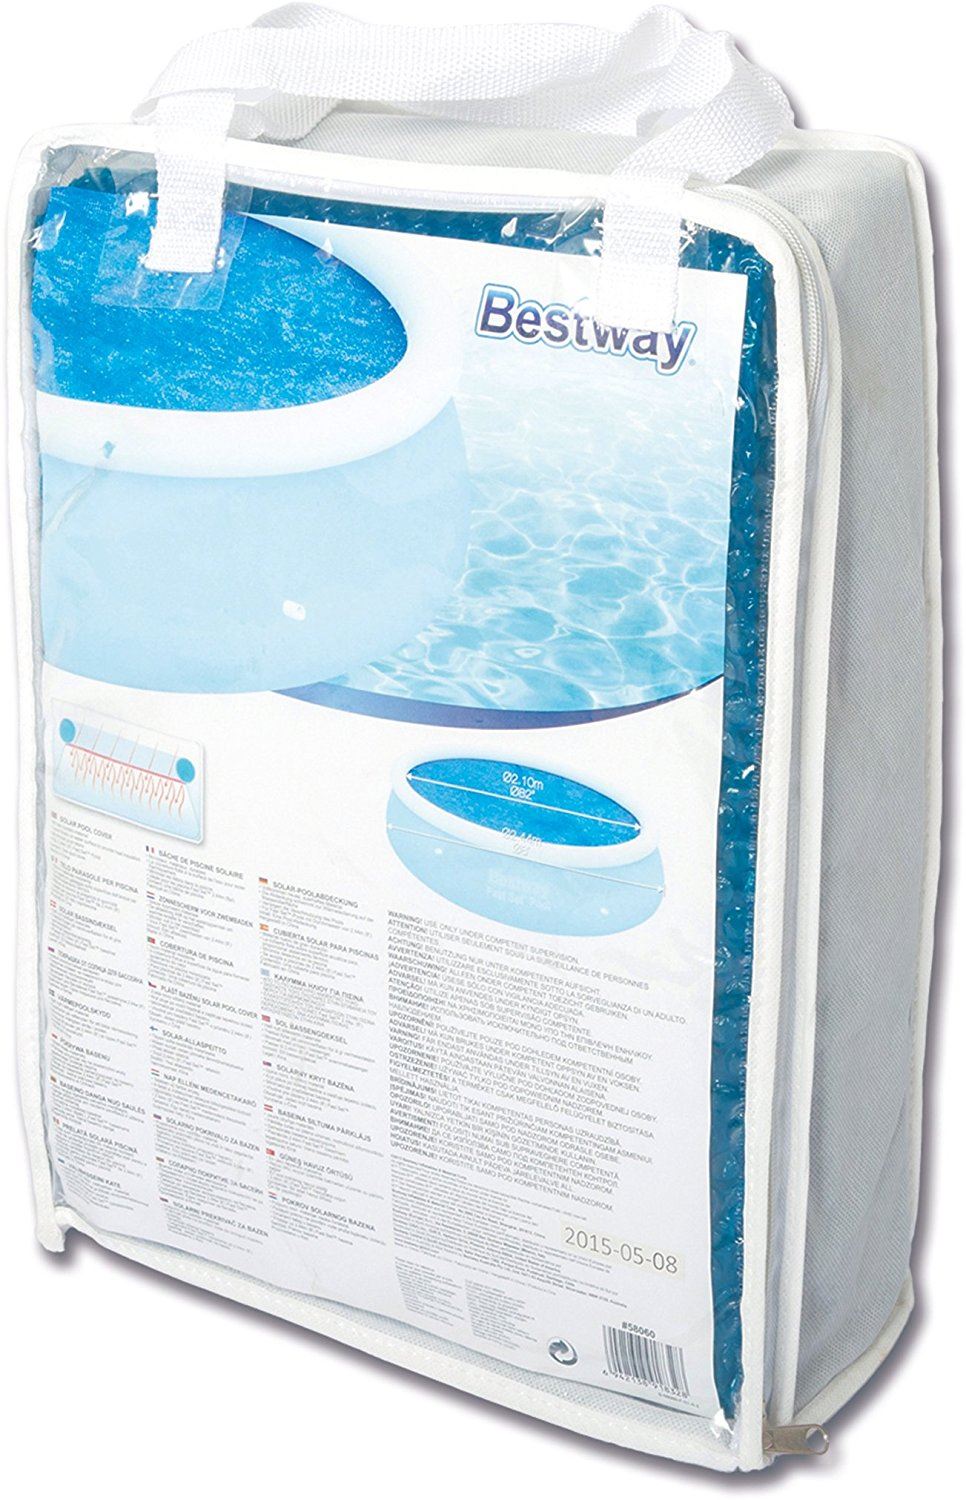 Bestway Round Solar Swimming Pool Cover 8 ft by Bestway - The Magic Toy Shop